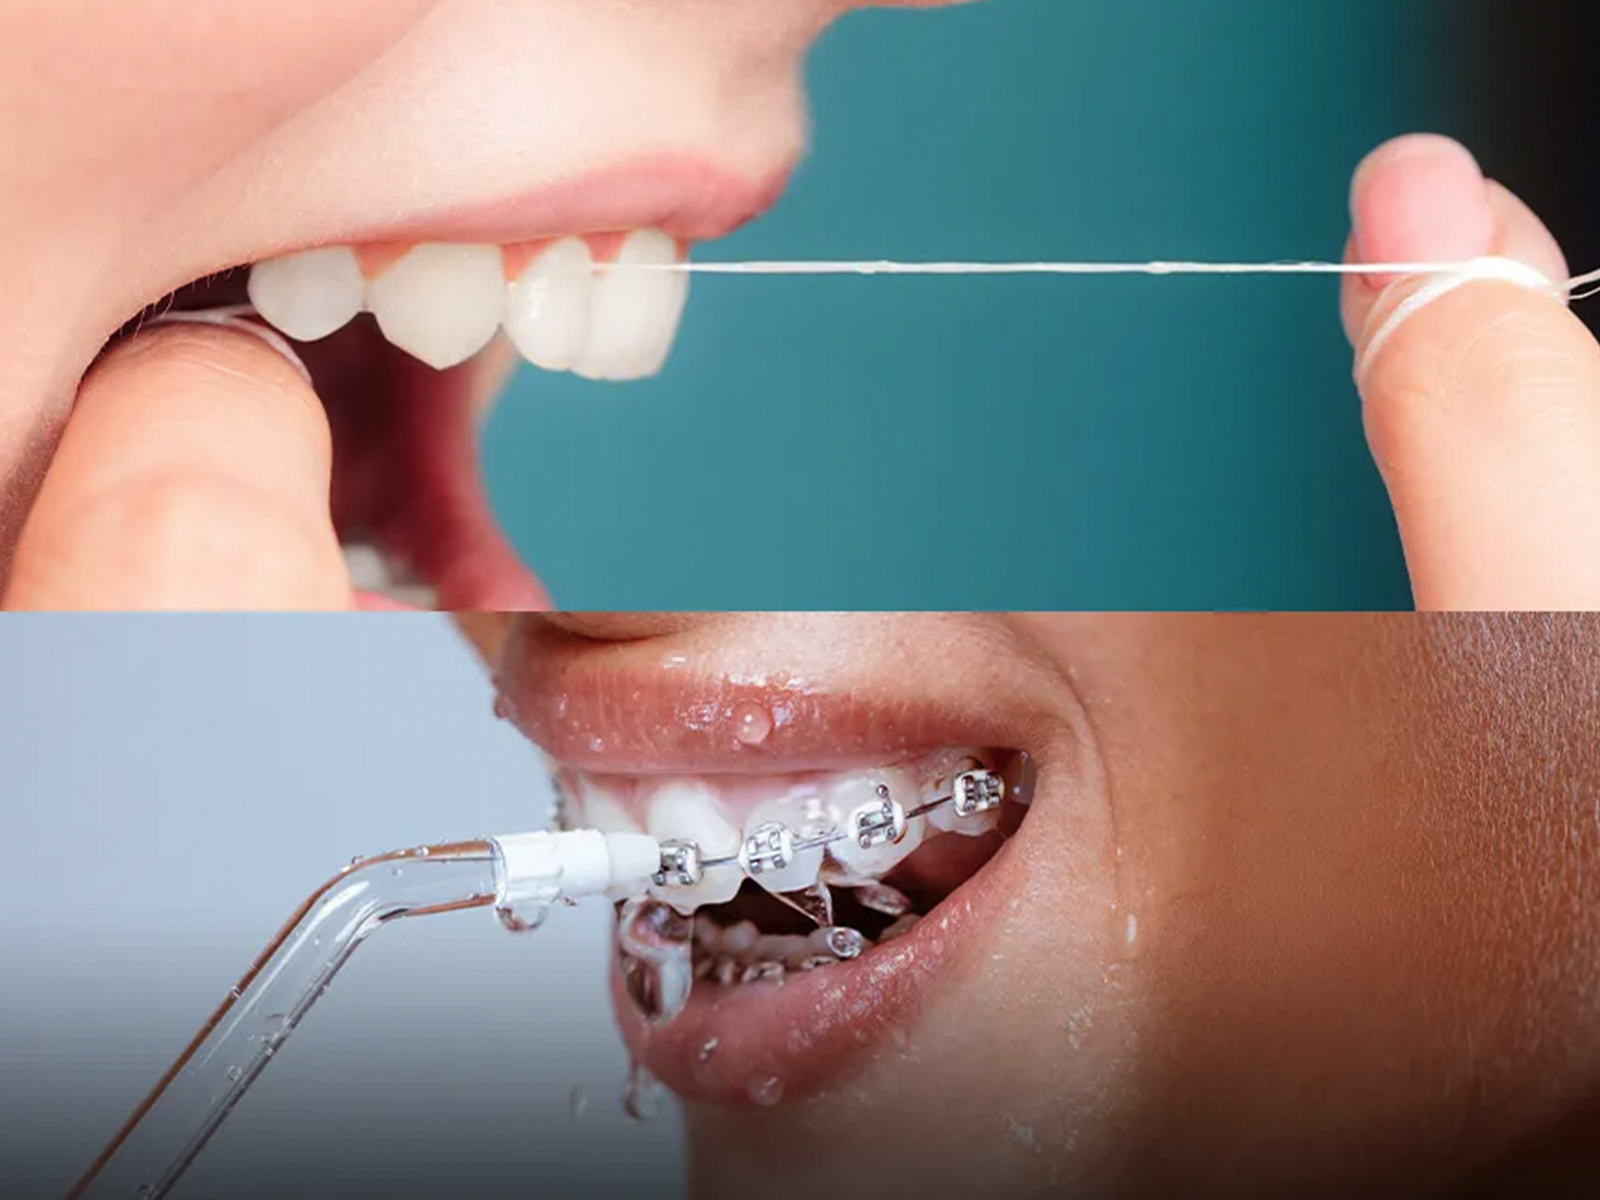 Water Flossing Vs. Traditional Flossing: Which Is Better?